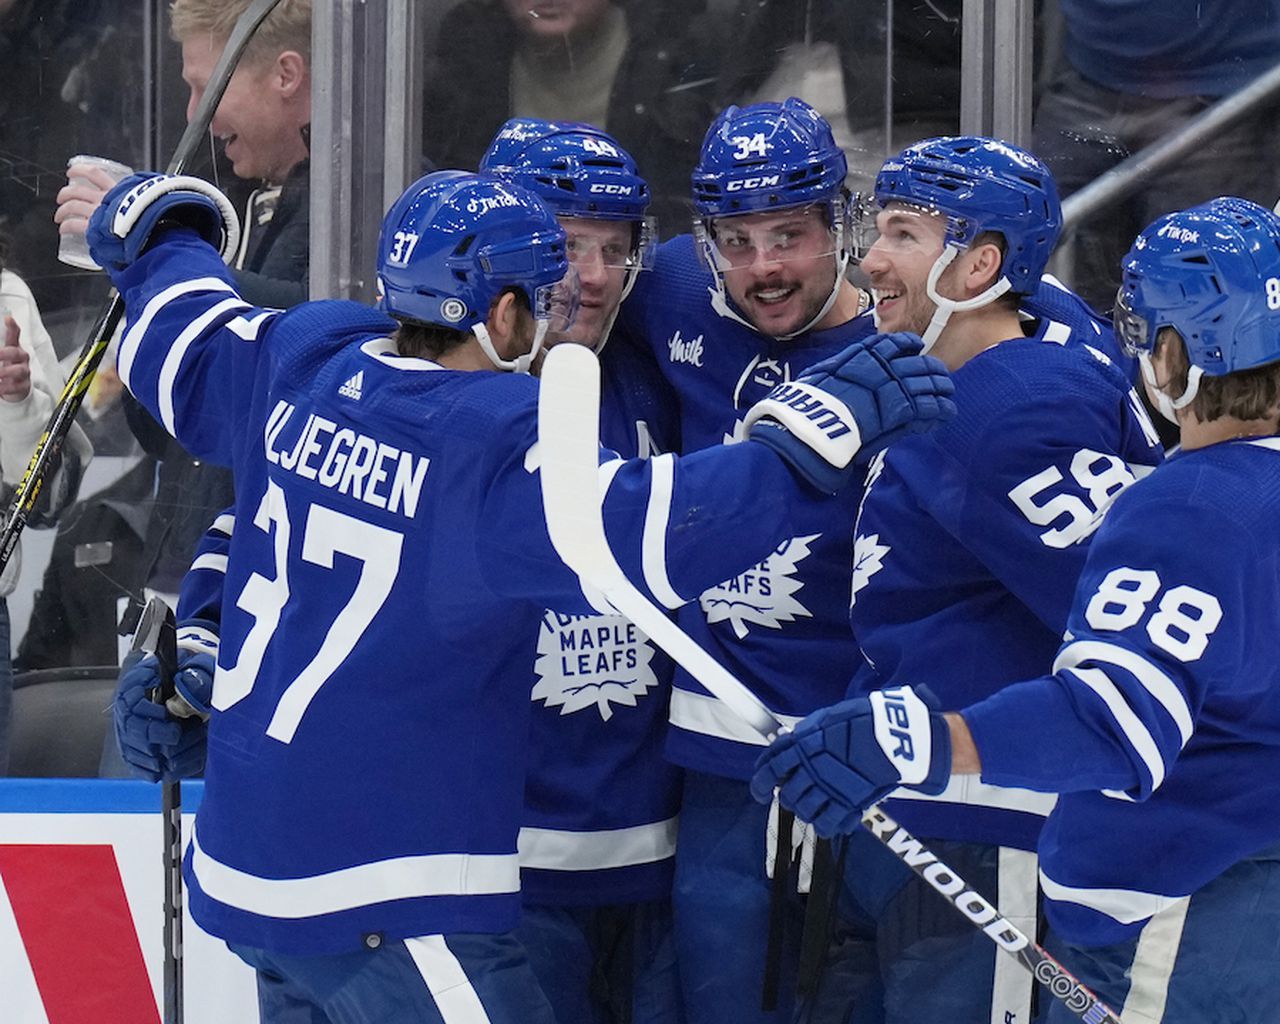 Maple Leafs vs. Canadiens picks and odds: Bet on Toronto to win big